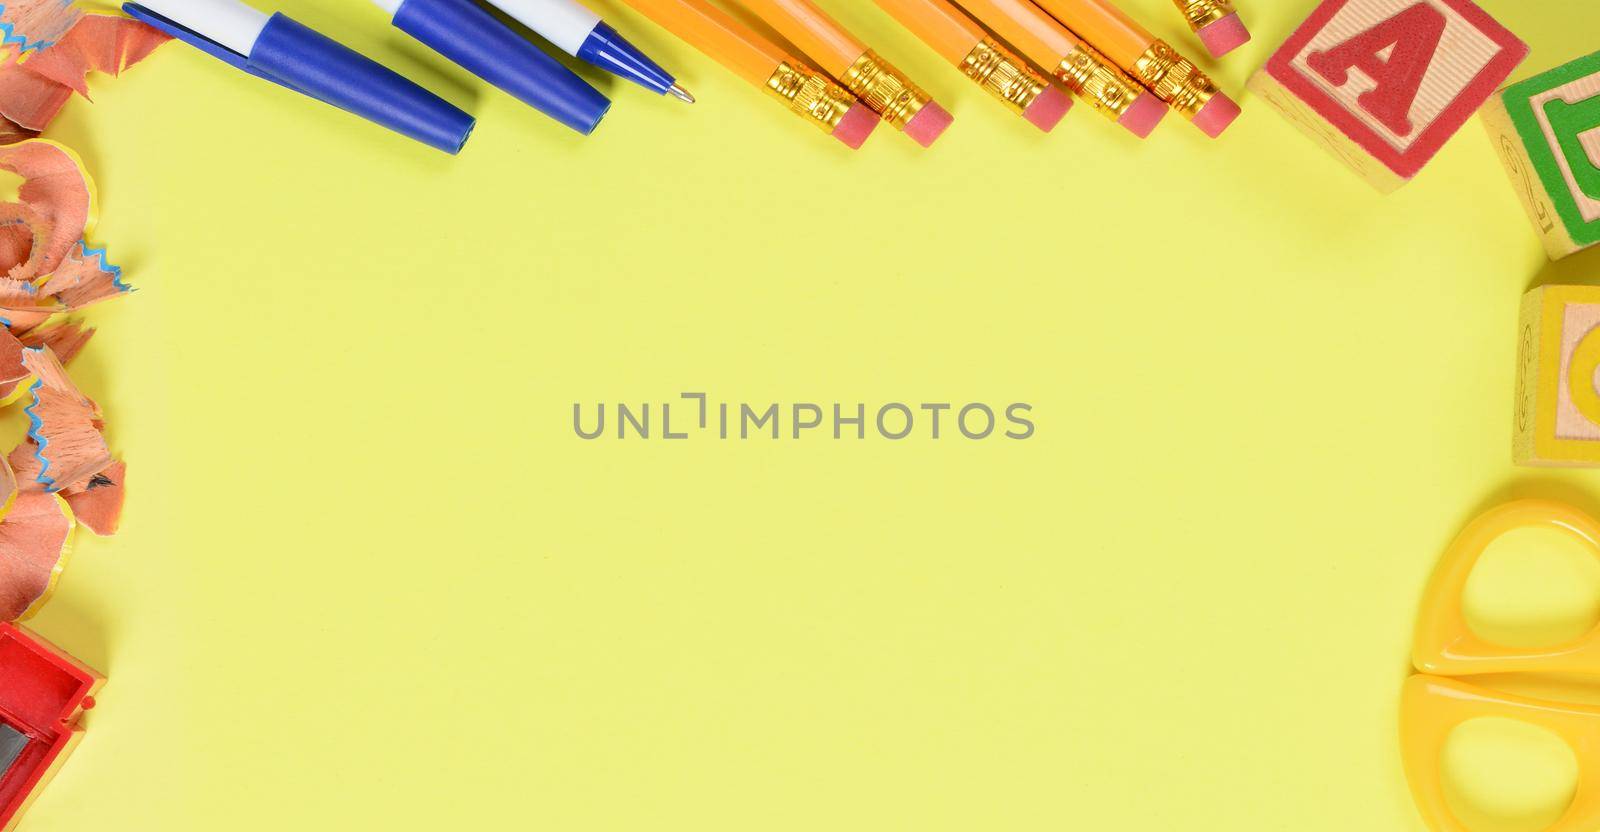 Back to school concept: School supplies on a yellow background with copy space. Bannr sized image.